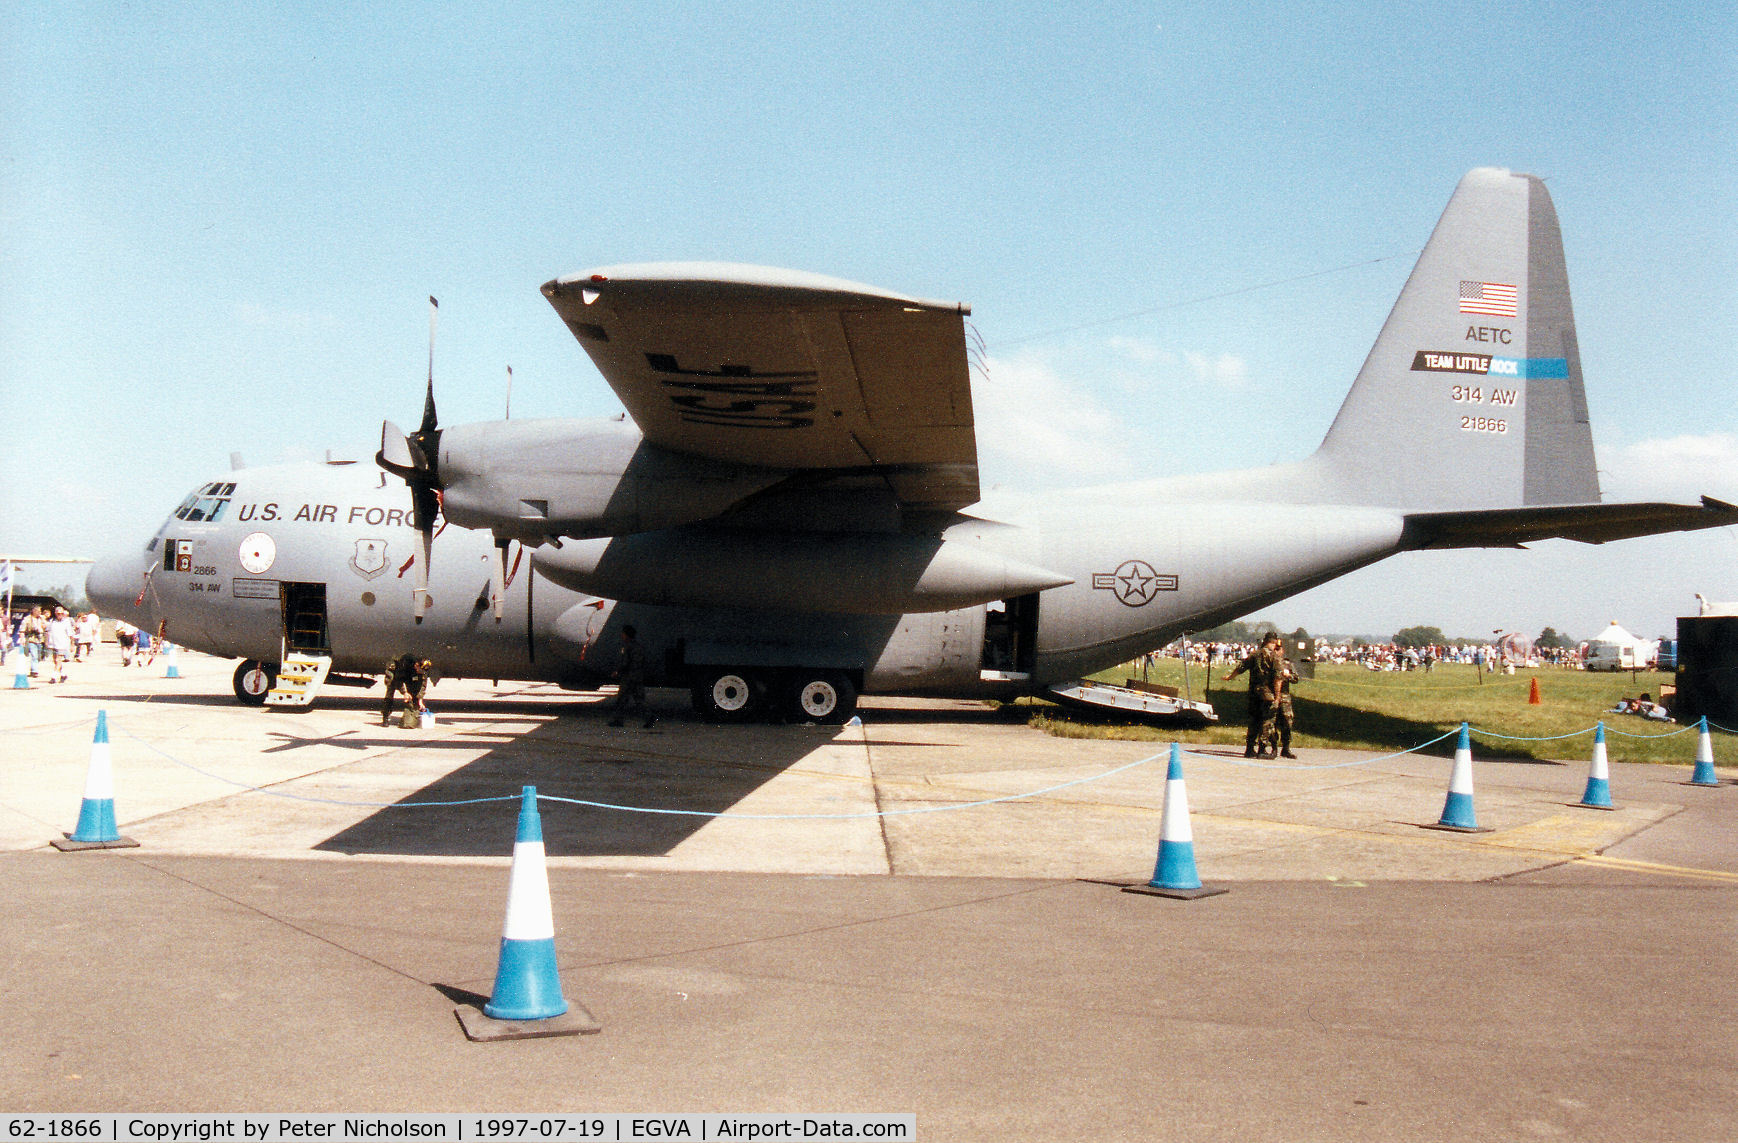 62-1866, 1962 Lockheed C-130E Hercules C/N 382-3830, Another view of the 314th Airlift Wing C-130E Hercules, callsign Wang 23, on display at the 1997 Intnl Air Tattoo at RAF Fairford.